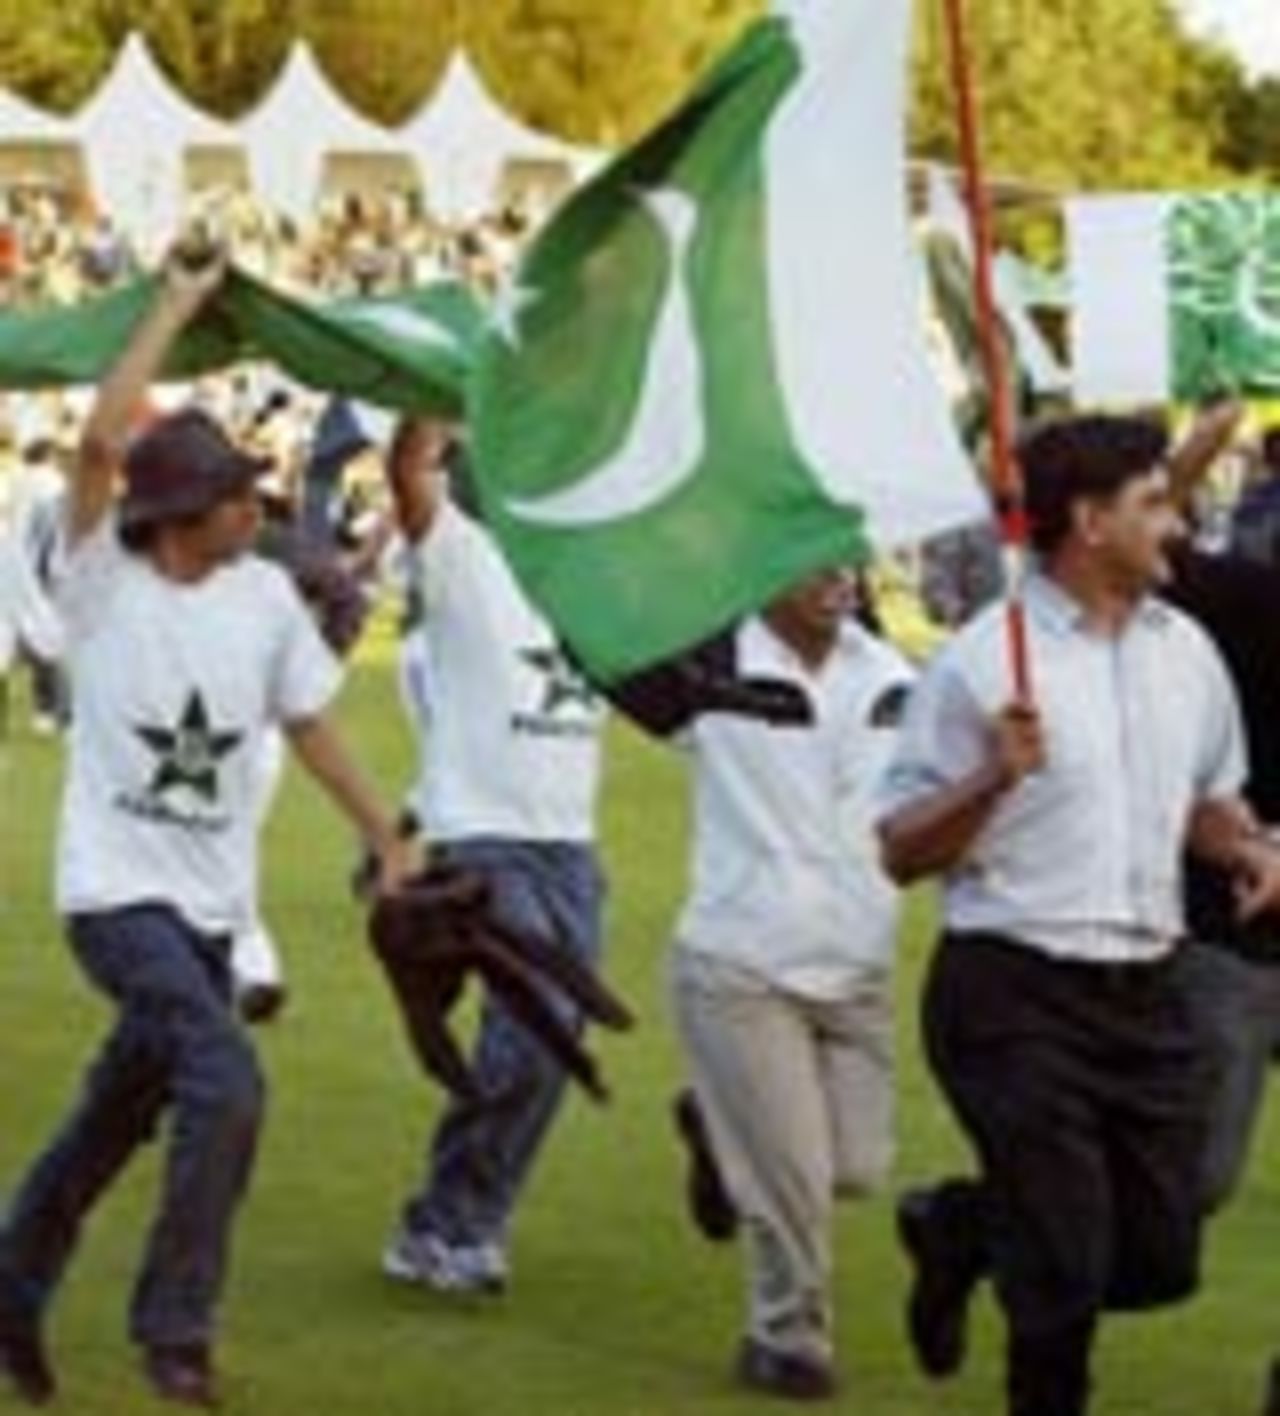 Fans rush onto the field seconds after Pakistan sealed their victory, India v Pakistan, 1st match, Videocon Cup, Amstelveen, August 21, 2004